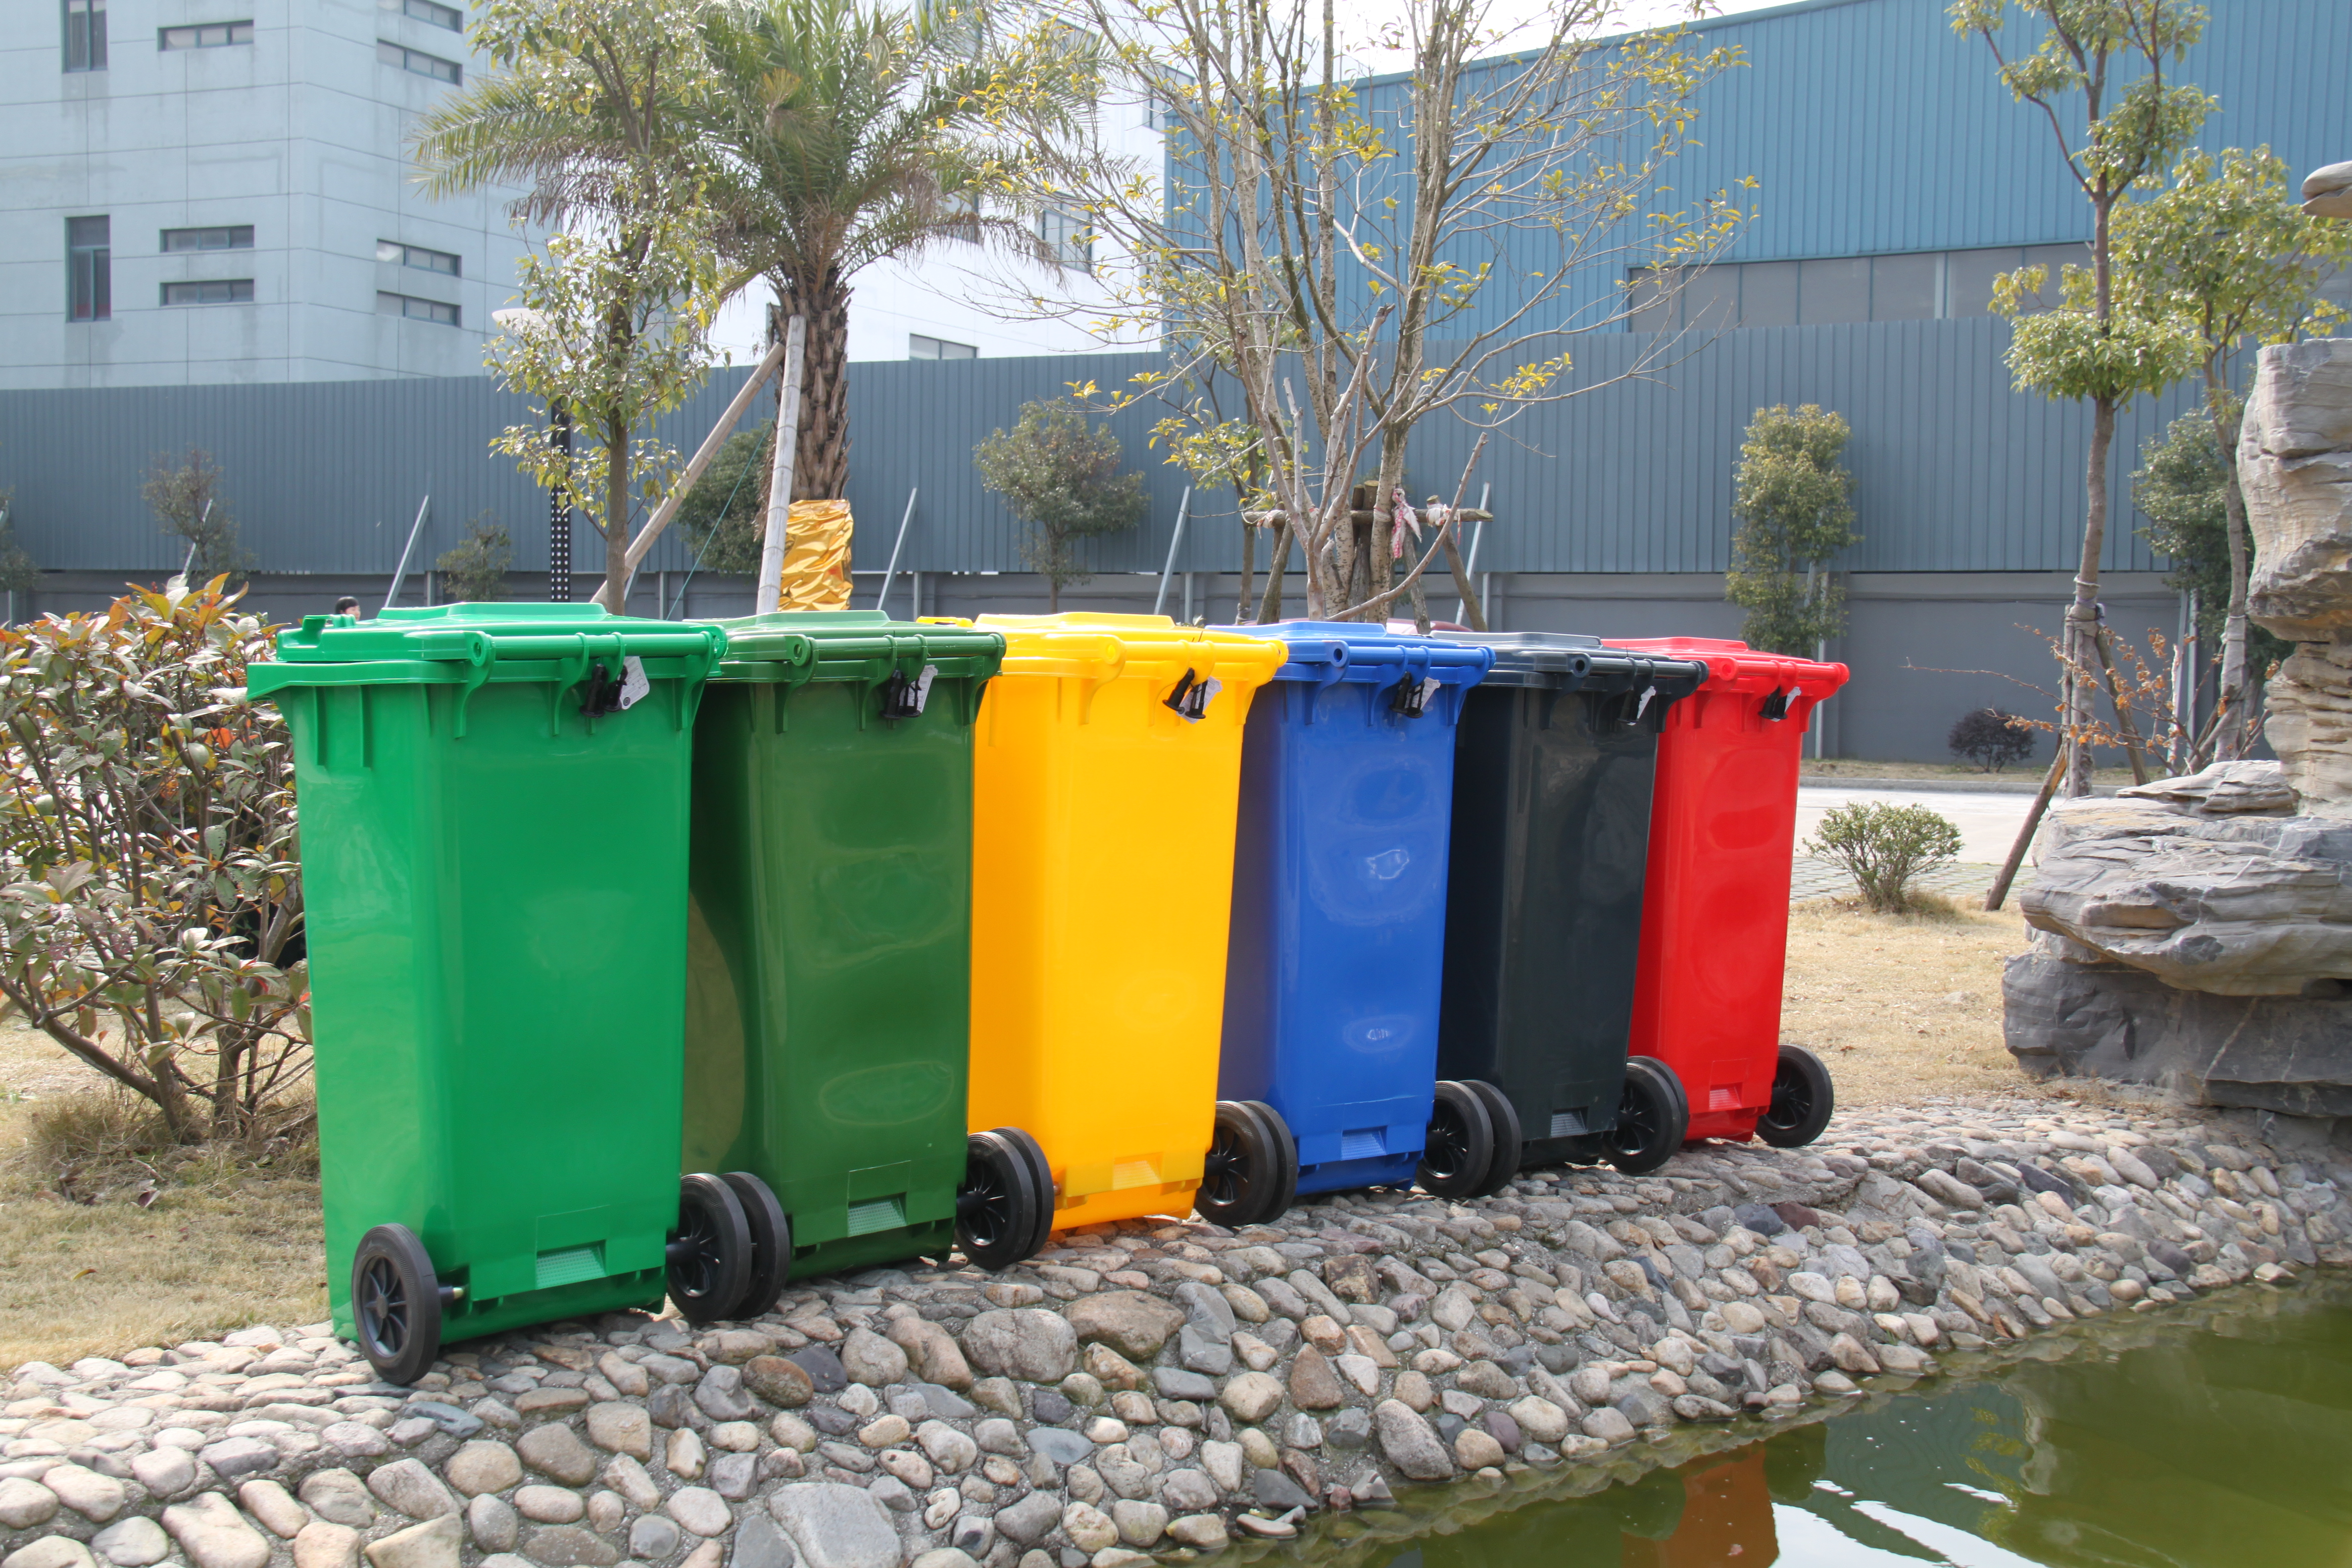 The key practical meaning of sorting dustbins